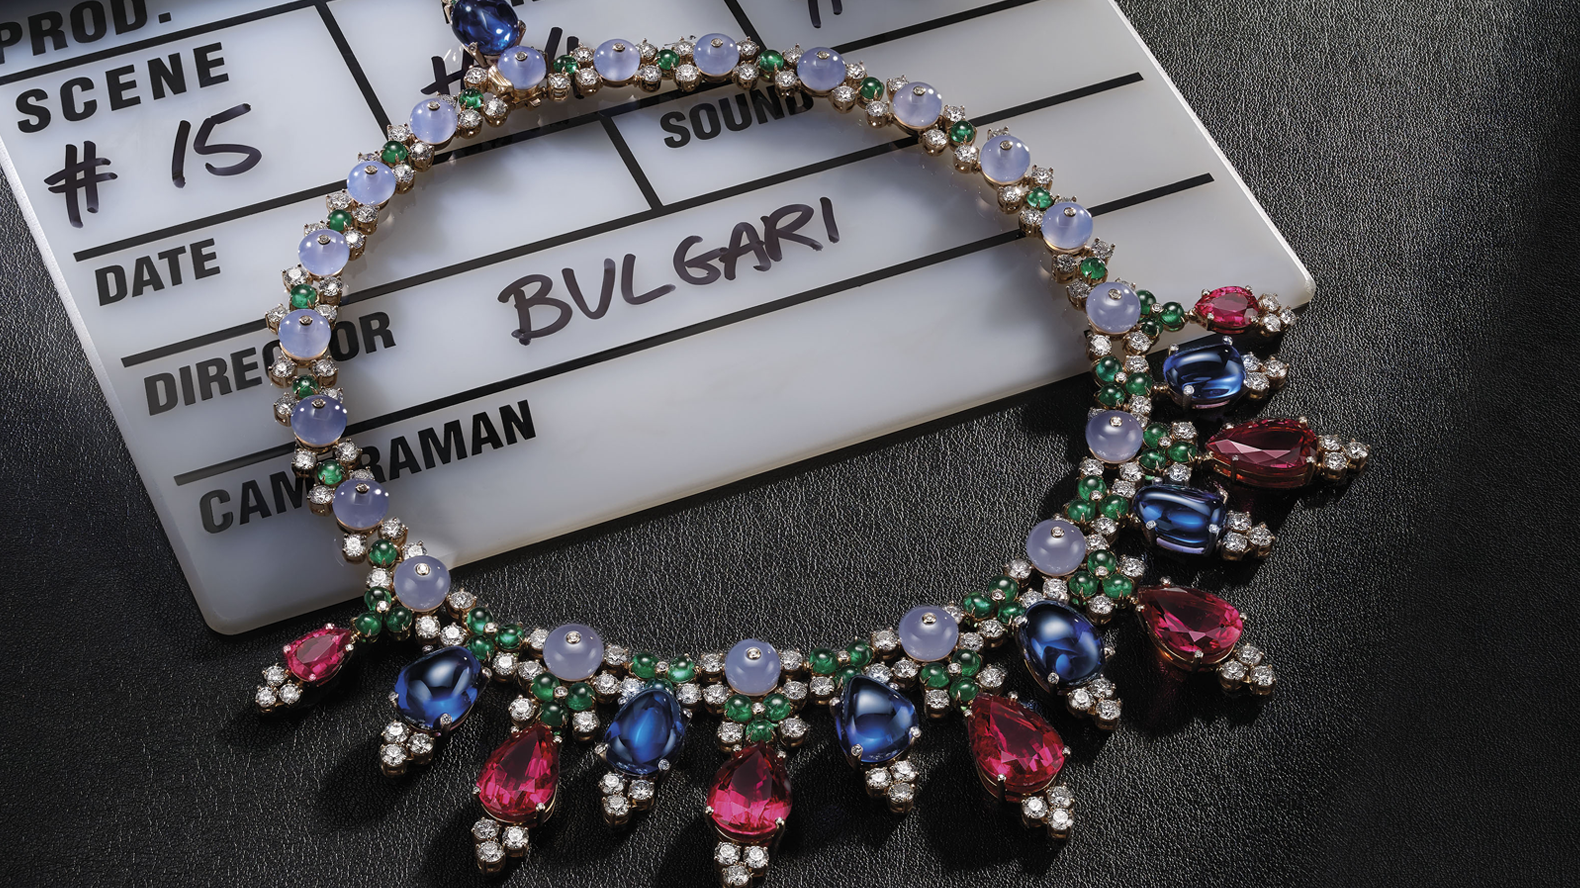 BVLGARI CINEMAGIA HIGH JEWELRY COLLECTION  Bvlgari jewelry, Jewelry  photoshoot, High jewelry